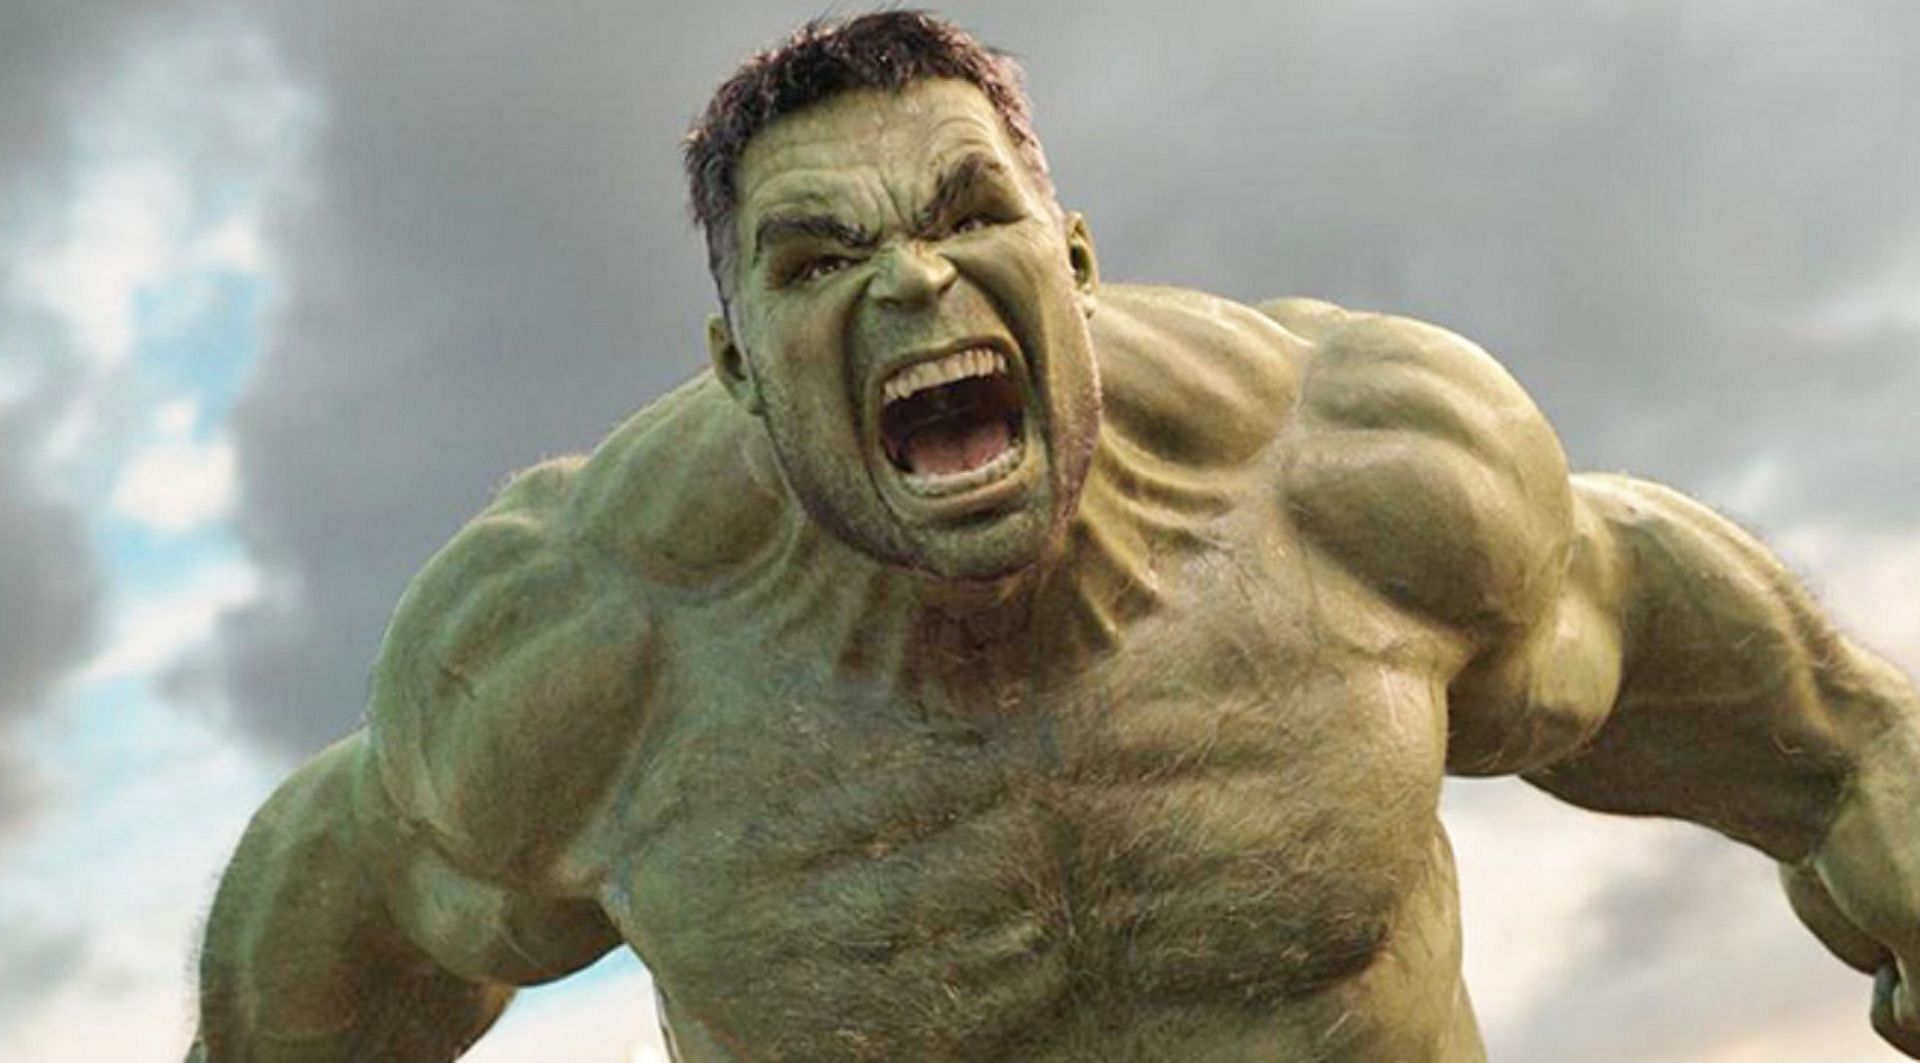 Bruce Banner turns into hulk whenever his anger level rises or heart beat goes up to 200 BPM (image via Marvel)